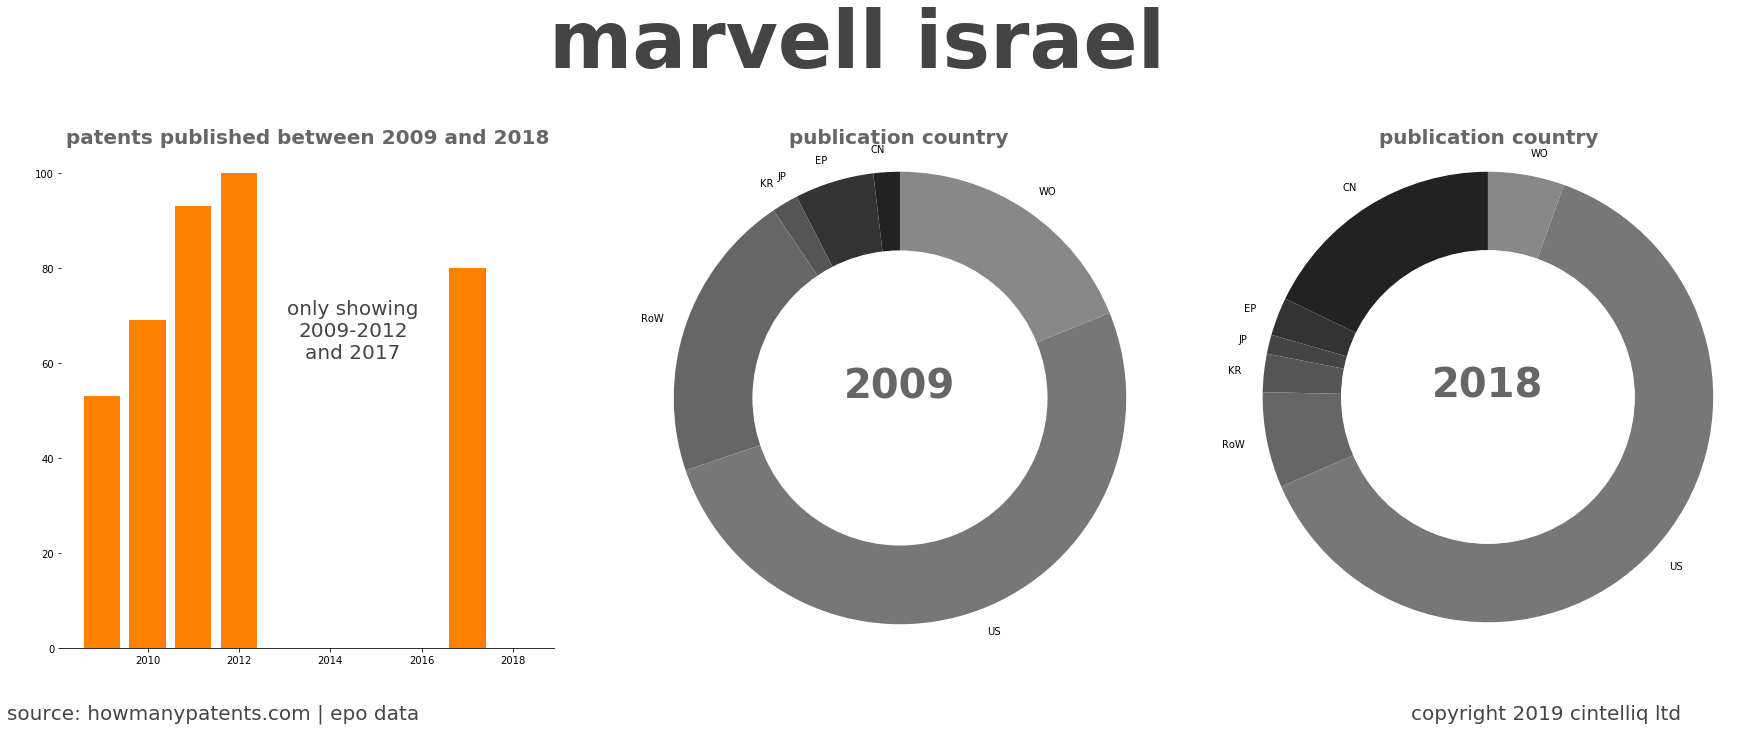 summary of patents for Marvell Israel 